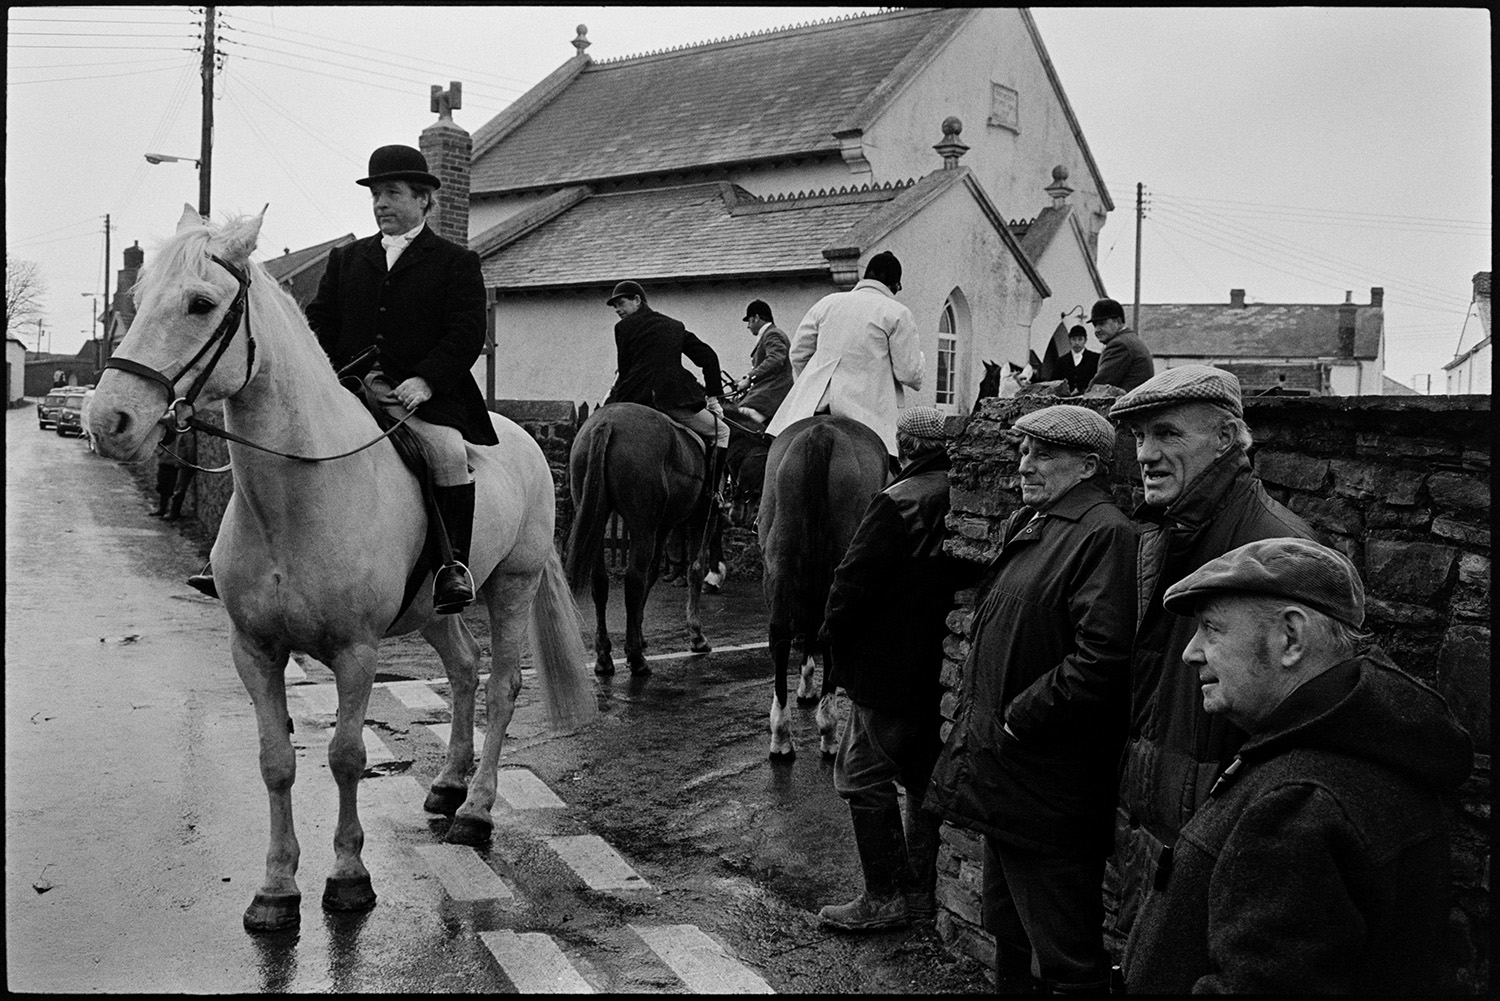 Hunt meet at village pub, with spectators, hounds and huntsmen. 
[Spectators watching mounted huntsmen at a hunt meet in High Bickington. A chapel building can be seen in the background.]